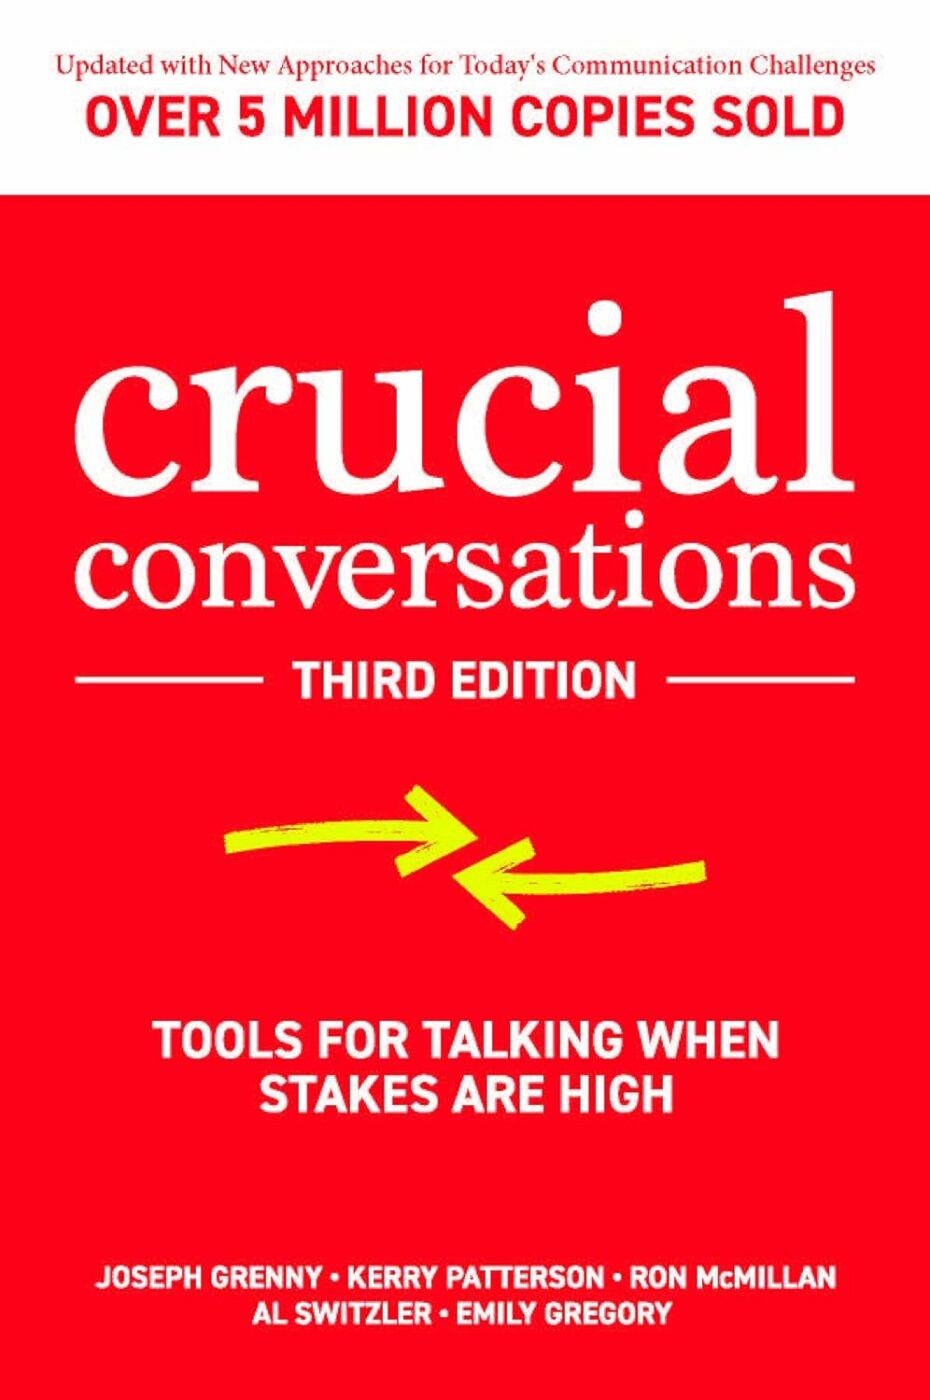 Looking for communication skills books? Try Crucial Conversations by Joseph Grenny, Kerry Patterson, Ron McMillan, Al Switzler & Emily Gregory